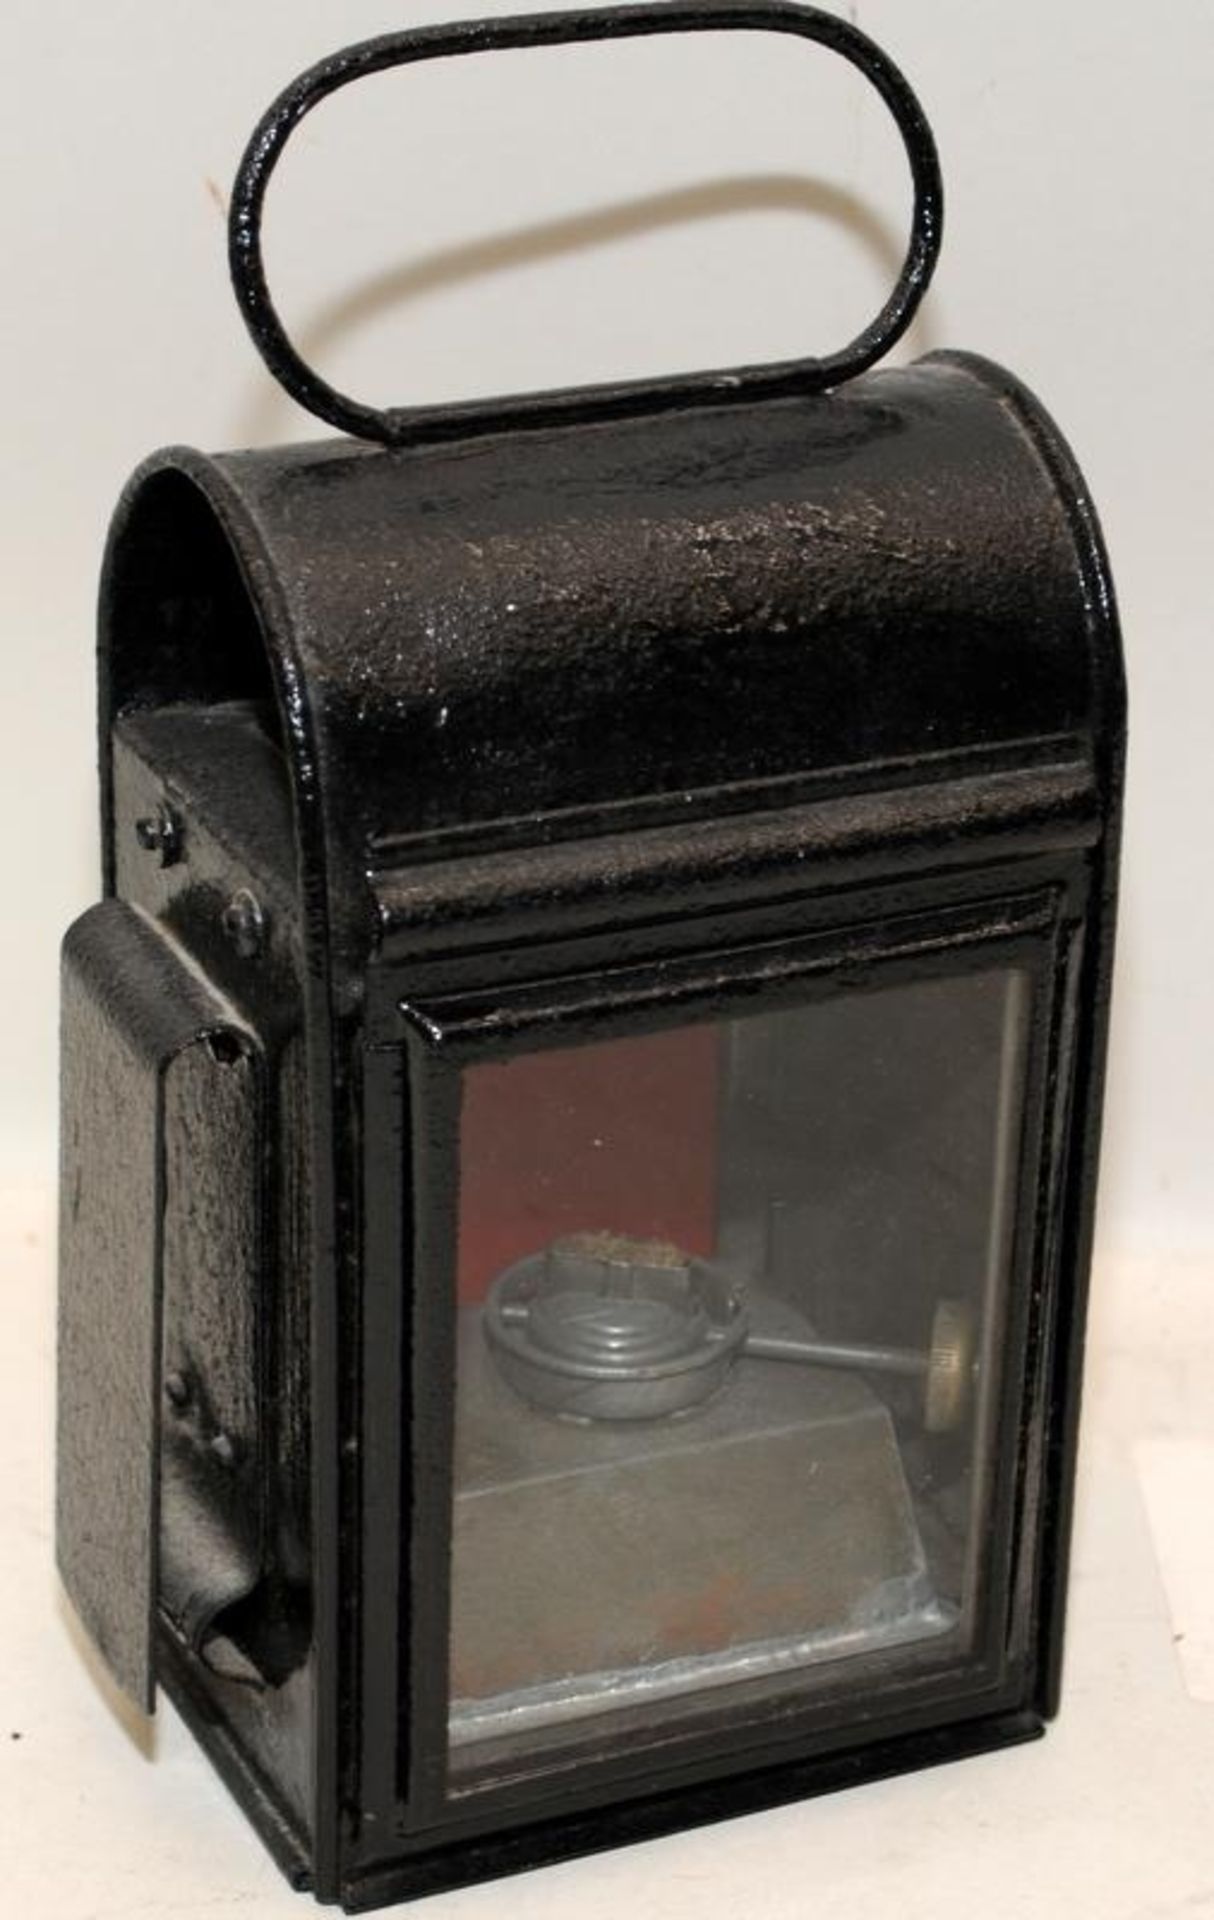 Vintage parrafin/oil carriage lantern, red stop/clear go. 24cms tall including carry handle